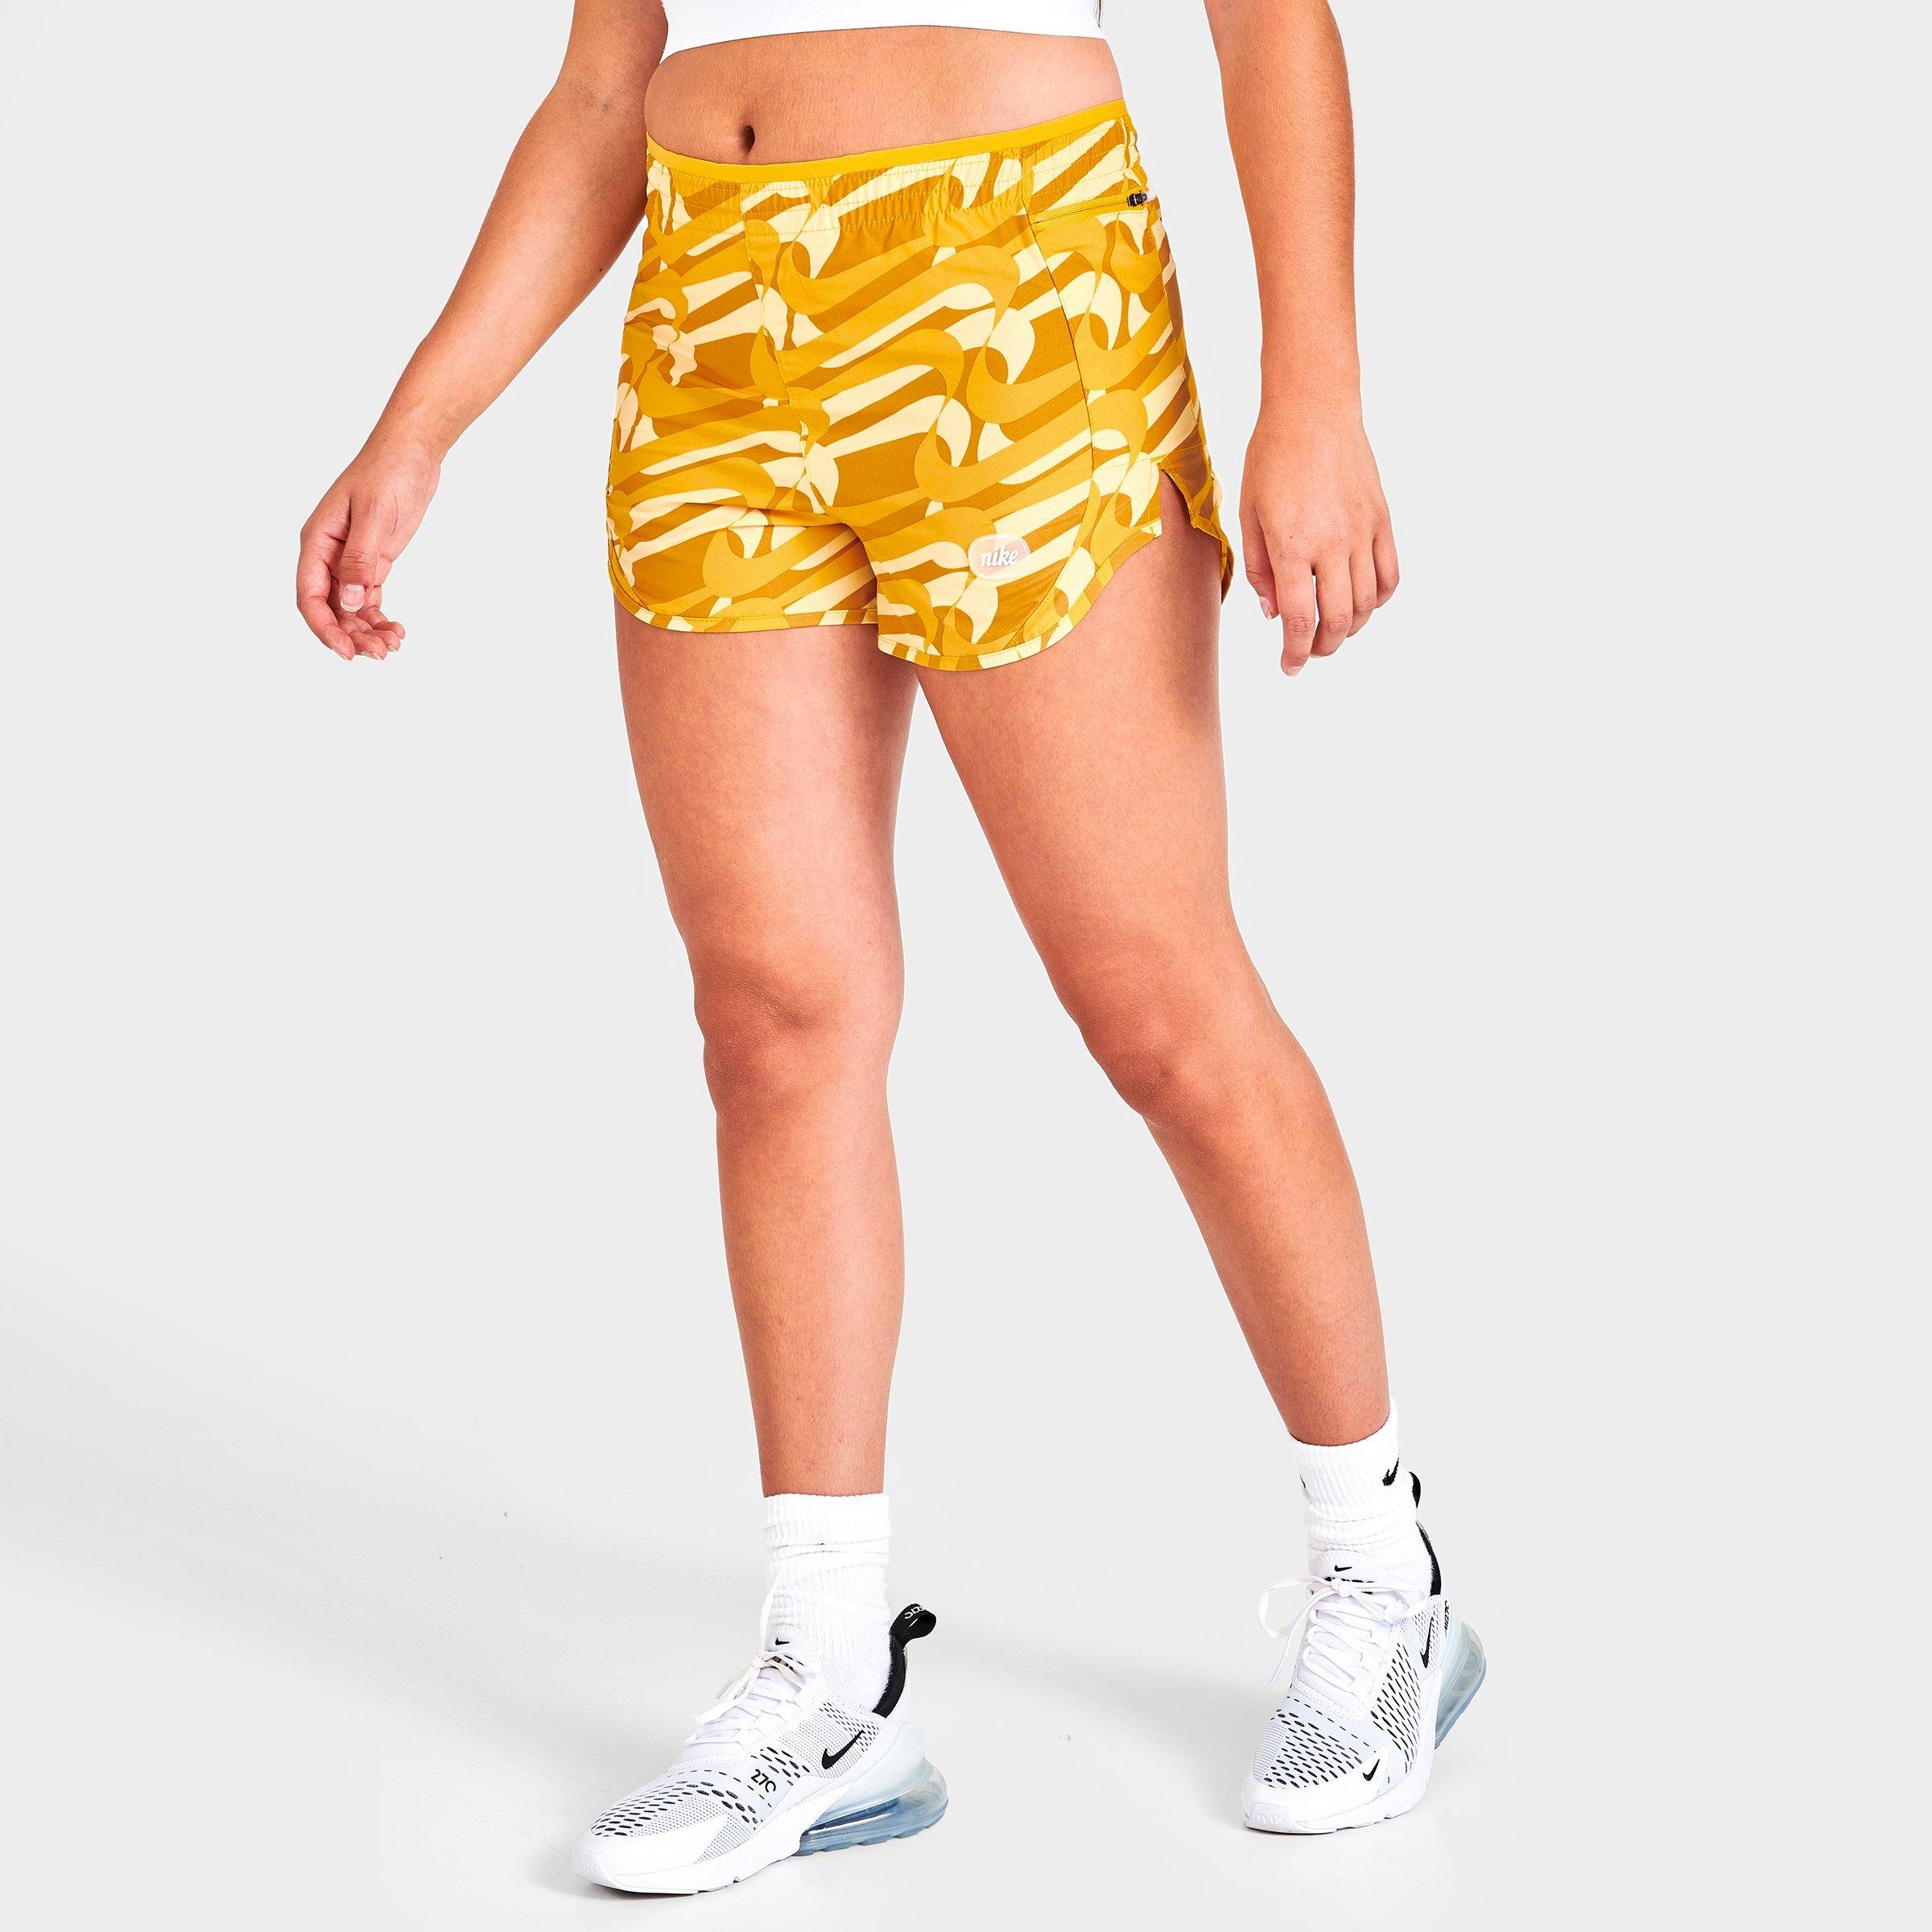 UPC 196149000121 product image for Nike Women's Dri-FIT Icon Clash Tempo Luxe Printed Running Shorts in Yellow/Yell | upcitemdb.com